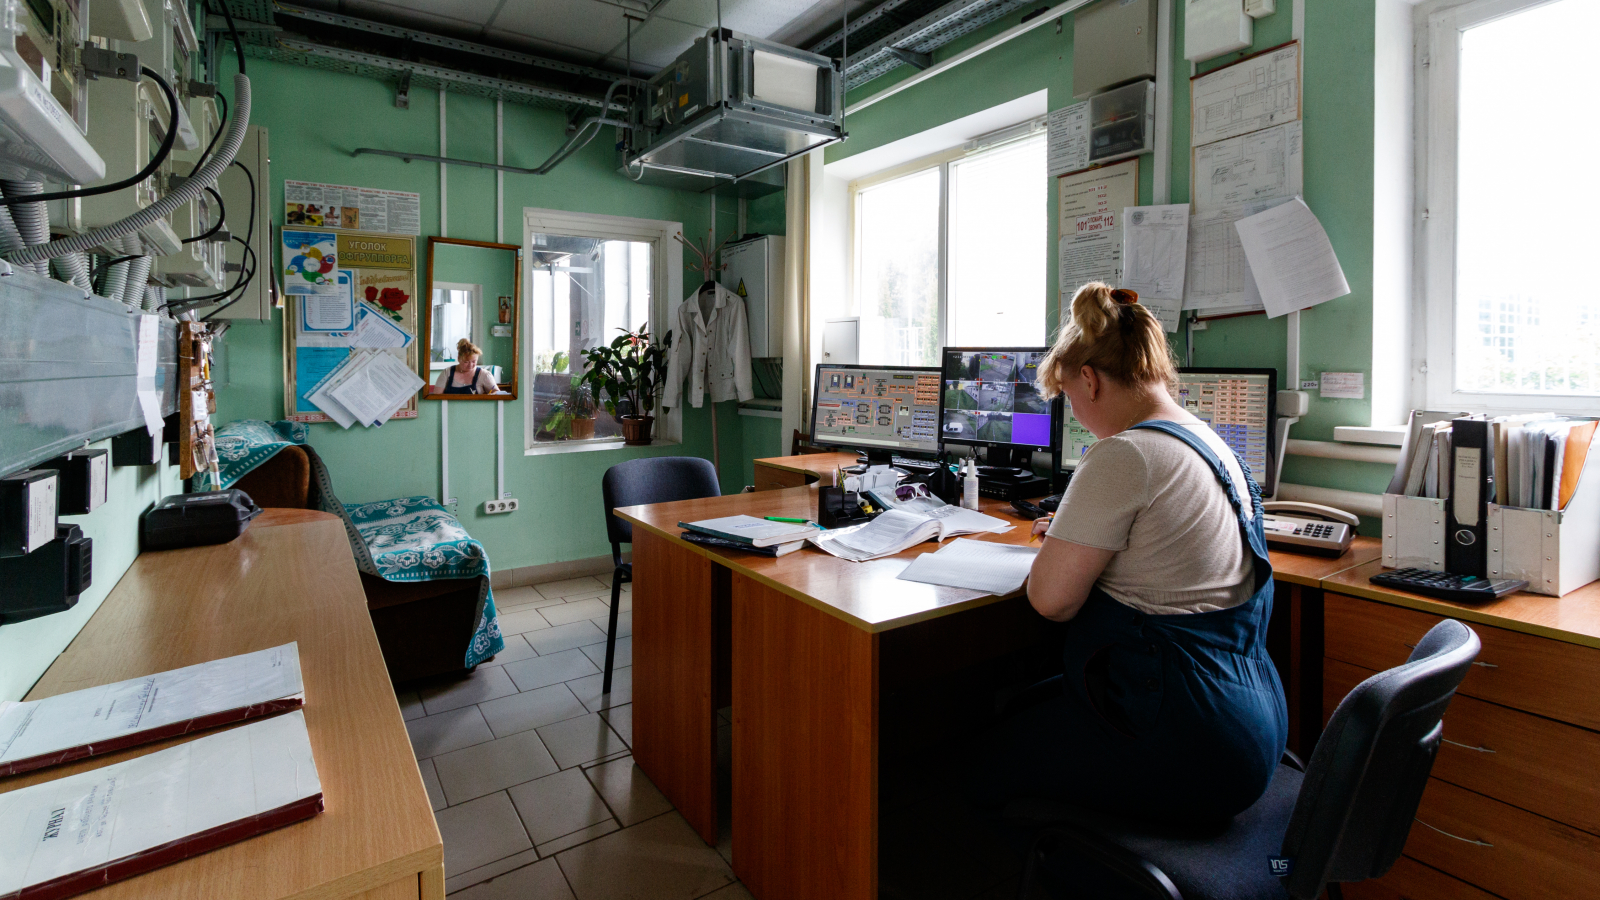 How can we teach Belarusian institutions to be more energy efficient?